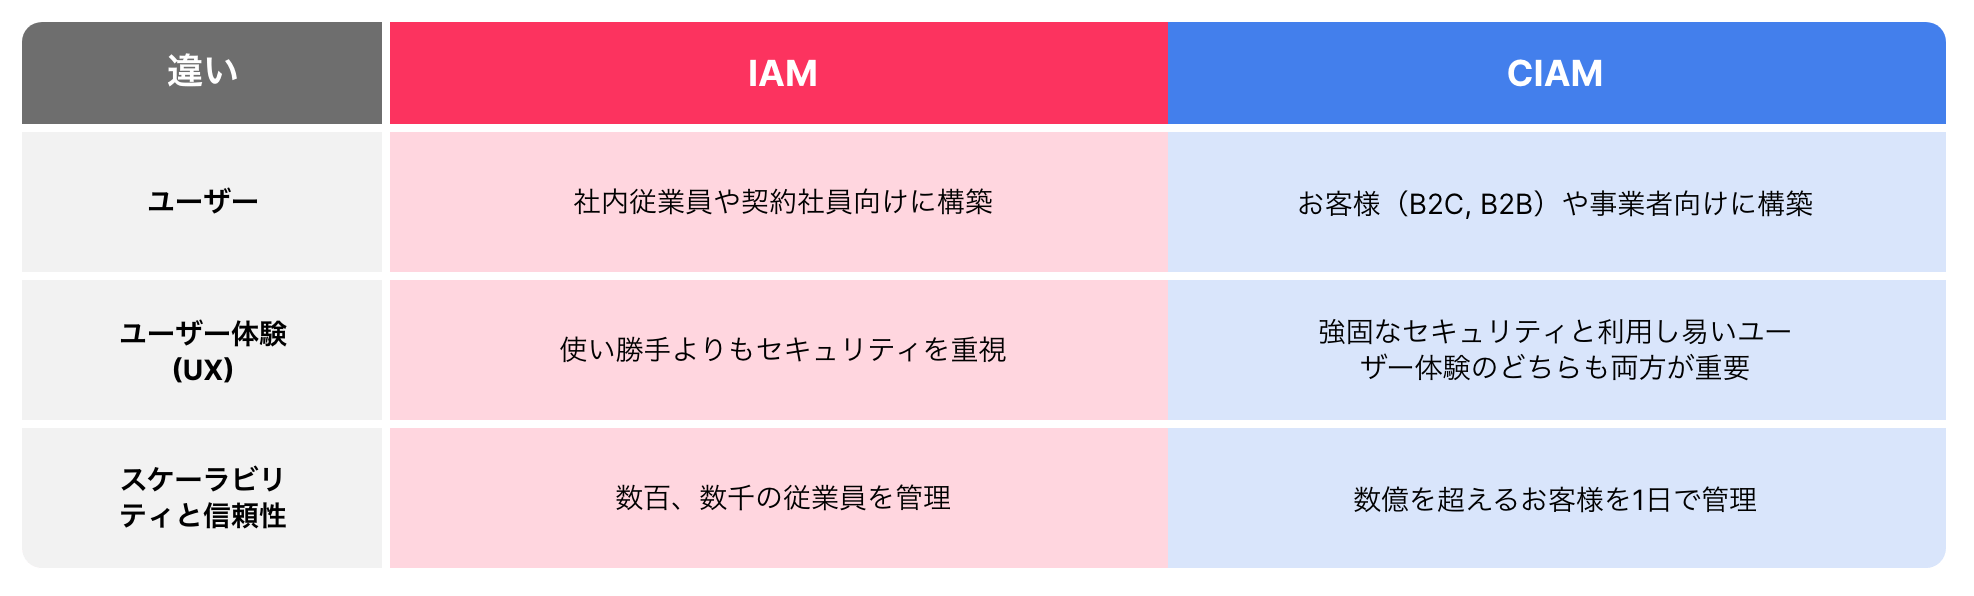 CIAMとIAMの比較：従業員向けIAMが顧客のニーズに応えられない理由 - Users UX and Scalability differences in IAM and CIAM JP 1 1